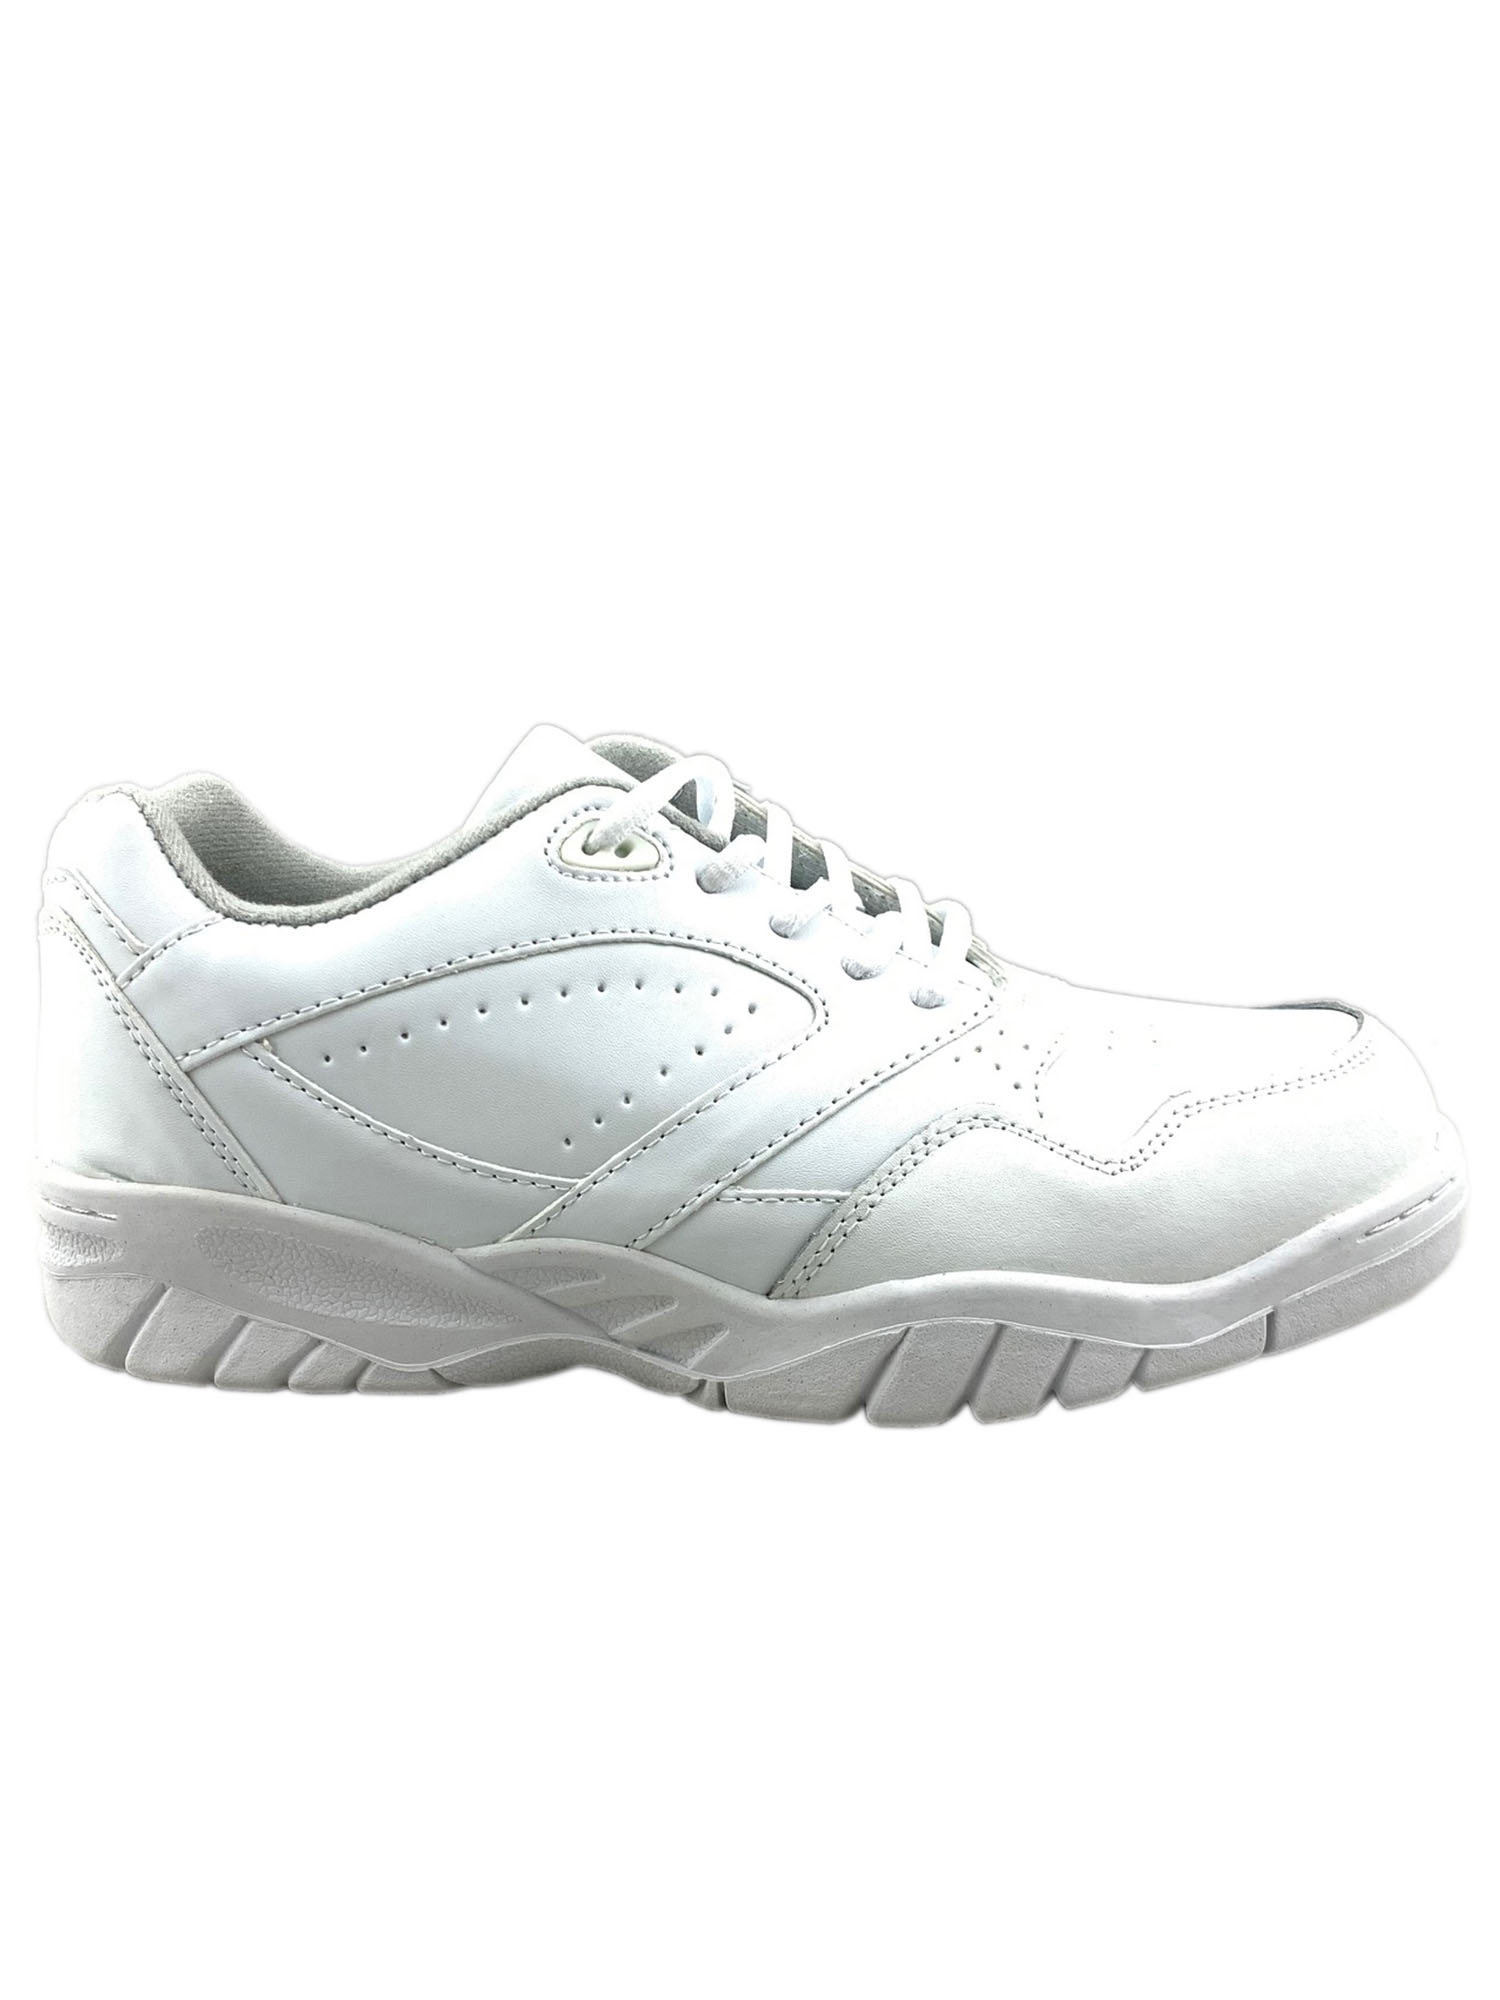 Tanleewa Men's Leather White Sports Shoes Lightweight Sneakers Breathable Casual Shoe Size 6 - image 1 of 5